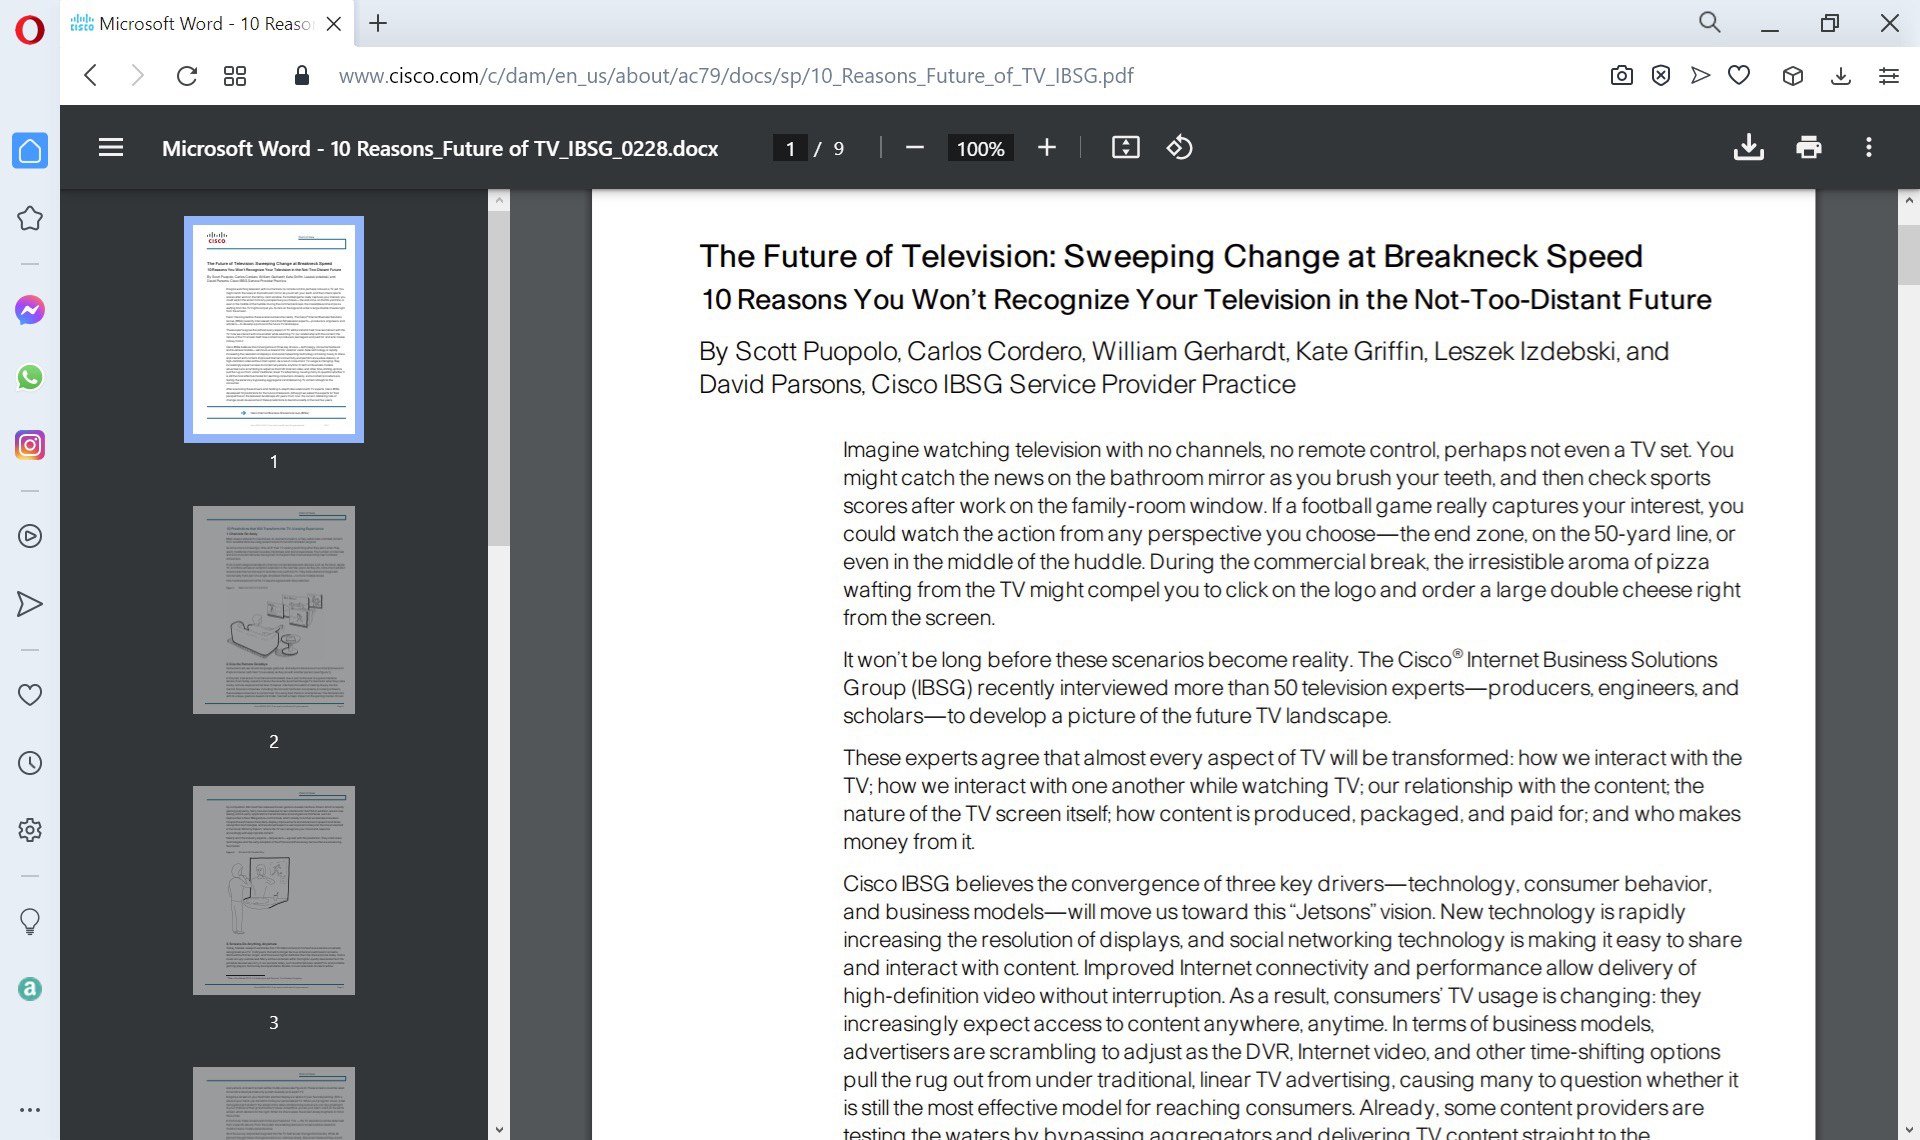 Cisco is indicated at top left of the report. The report reads as follows: The Future of Television: Sweeping Change at Breakneck Speed. 10 Reasons You Won’t Recognize Your Television in the Not-Too-Distant Future. By Scott Puopolo, Carlos Cordero, William Gerhardt, Kate Griffin, Leszek Izdebski, and David Parsons, Cisco I B S G Service Provider Practice. Imagine watching television with no channels, no remote control, perhaps not even a T V set. You might catch the news on the bathroom mirror as you brush your teeth, and then check sports scores after work on the family-room window. If a football game really captures your interest, you could watch the action from any perspective you choose, the end zone, on the 50-yard line, or even in the middle of the huddle. During the commercial break, the irresistible aroma of pizza wafting from the T V might compel you to click on the logo and order a large double cheese right from the screen. It won’t be long before these scenarios become reality. The Cisco Internet Business Solutions Group (I B S G) recently interviewed more than 50 television experts, producers, engineers, and scholars, to develop a picture of the future T V landscape. These experts agree that almost every aspect of T V will be transformed: how we interact with the T V; how we interact with one another while watching T V; our relationship with the content; the nature of the T V screen itself; how content is produced, packaged, and paid for; and who makes money from it. Cisco I B S G believes the convergence of three key drivers, technology, consumer behavior, and business models, will move us toward this “Jetsons” vision. New technology is rapidly increasing the resolution of displays, and social networking technology is making it easy to share and interact with content. Improved Internet connectivity and performance allow delivery of high-definition video without interruption. As a result, consumers’ T V usage is changing: they increasingly expect access to content anywhere, anytime. In terms of business models, advertisers are scrambling to adjust as the D V R, Internet video, and other time-shifting options pull the rug out from under traditional, linear T V advertising, causing many to question whether it is still the most effective model for reaching consumers. Already, some content providers are testing the waters by bypassing aggregators and delivering T V content straight to the consumer.